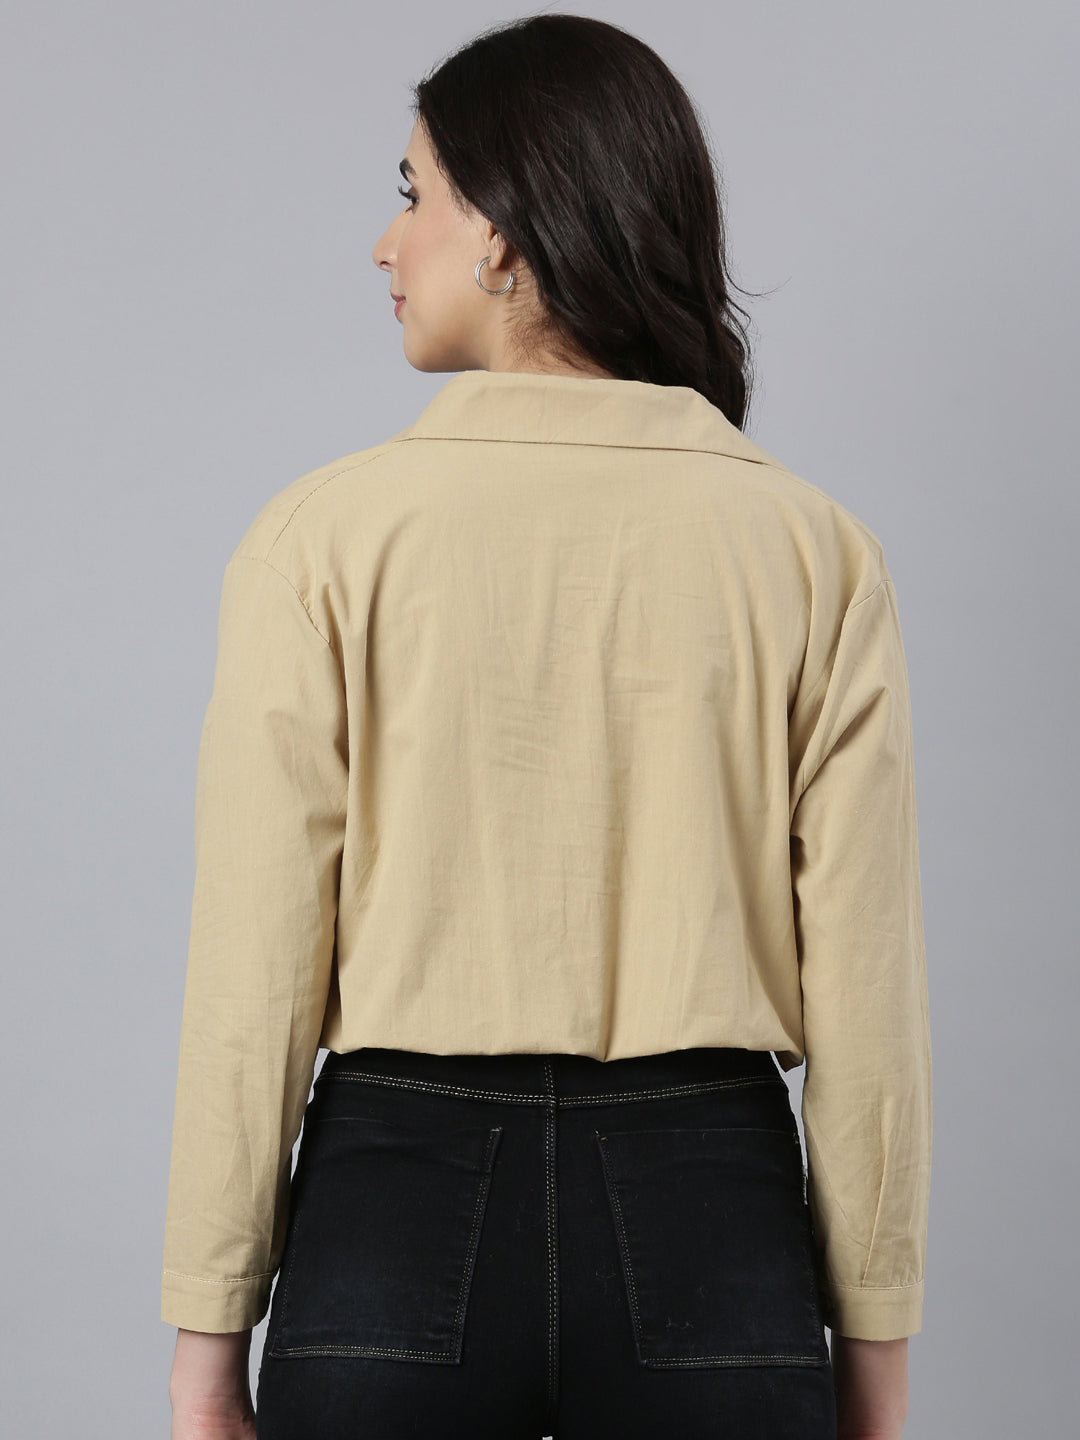 Women Solid Khaki Shirt Style Top Comes with Attached Inner Top and Neck Chain